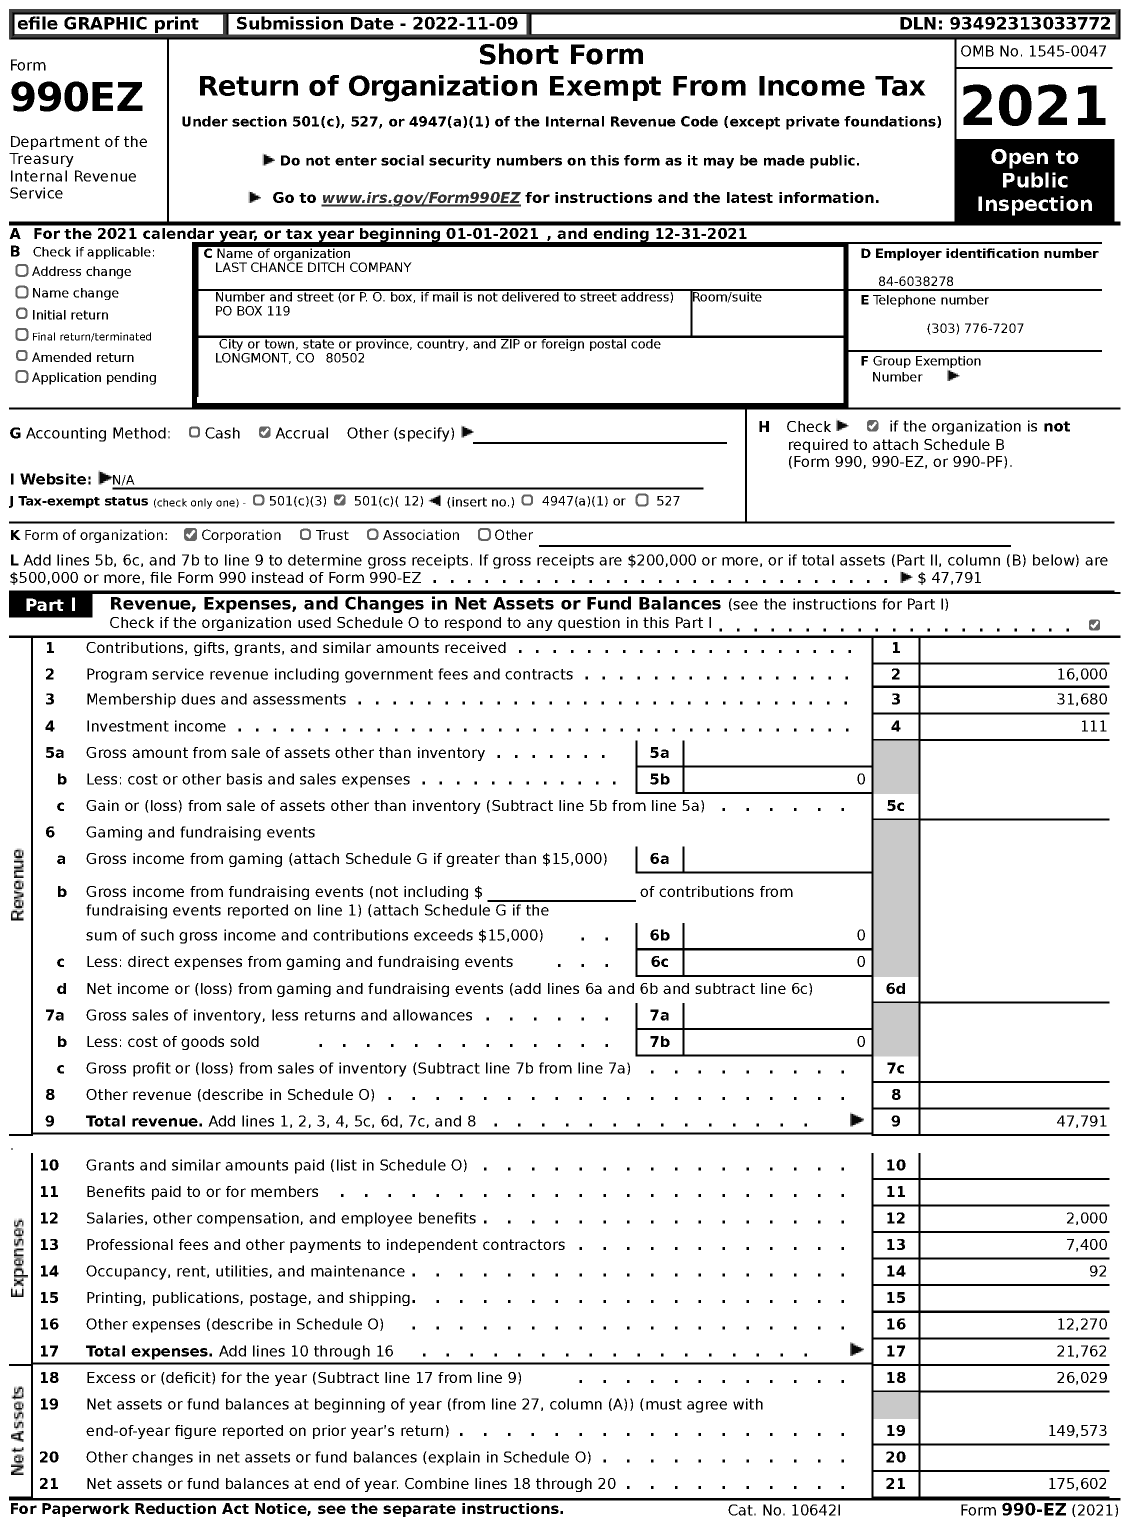 Image of first page of 2021 Form 990EZ for Last Chance Ditch Company